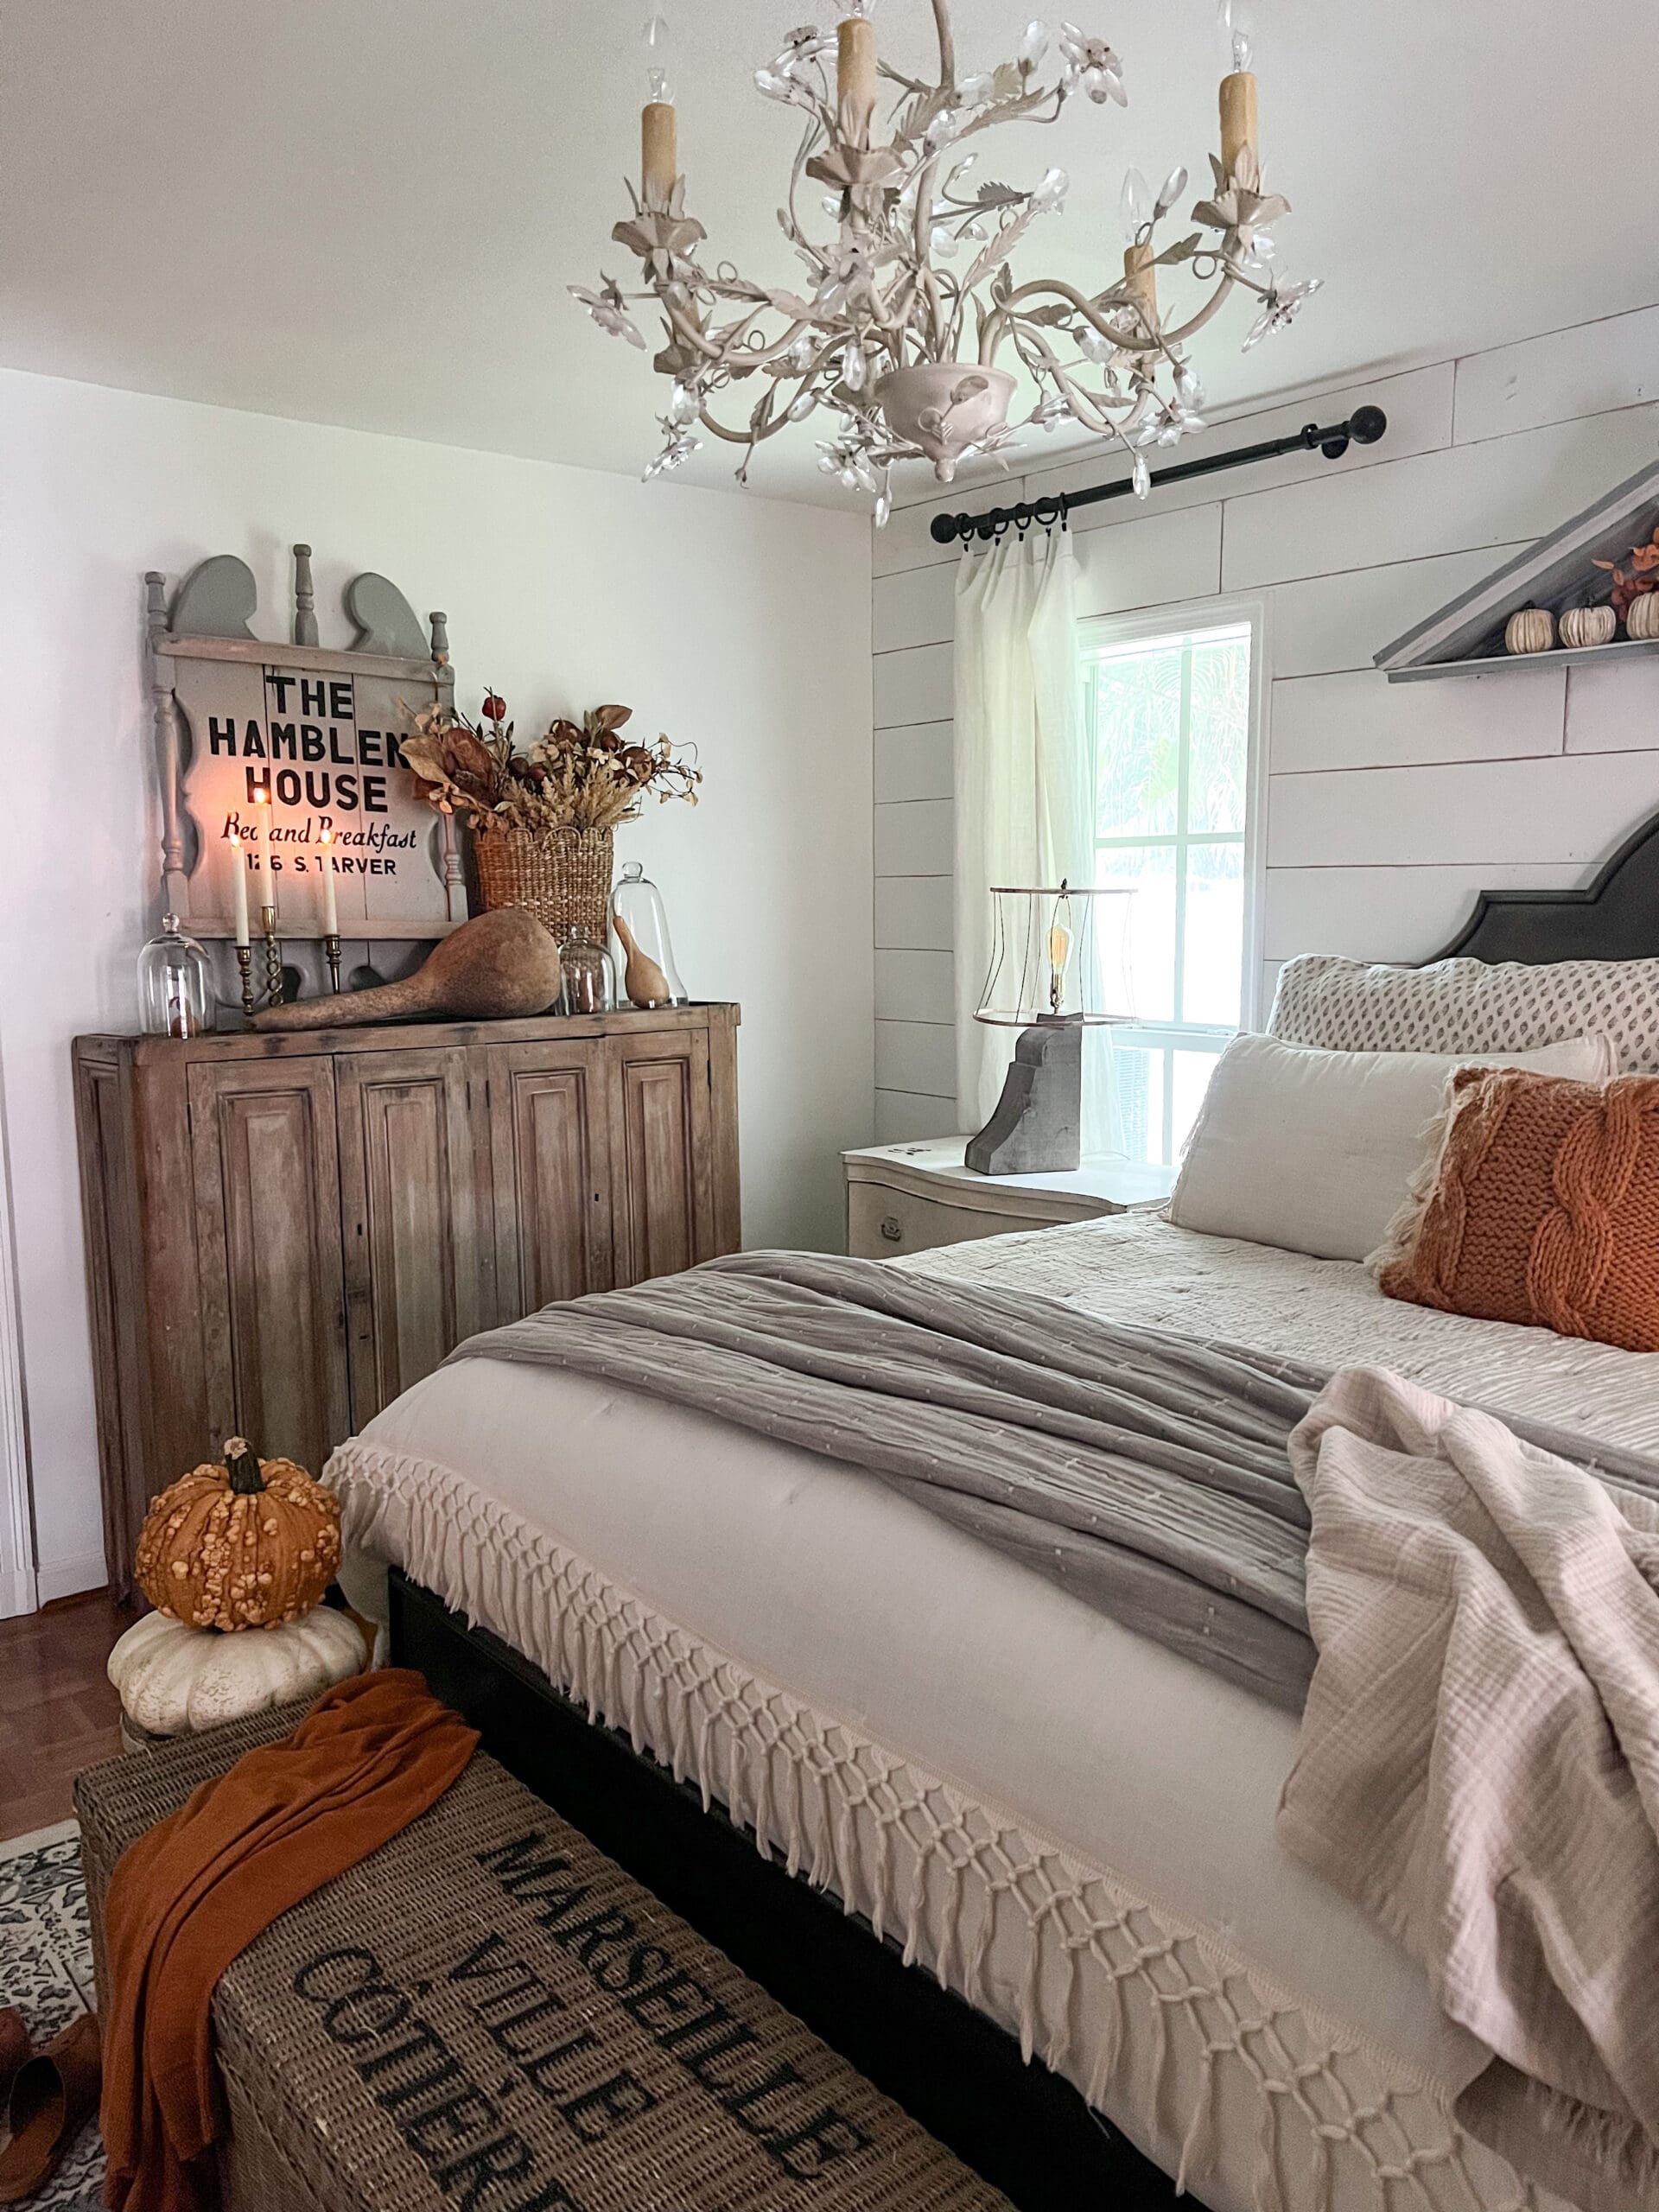 7 Bed Accessories to Stylize Your Bedroom for Fall